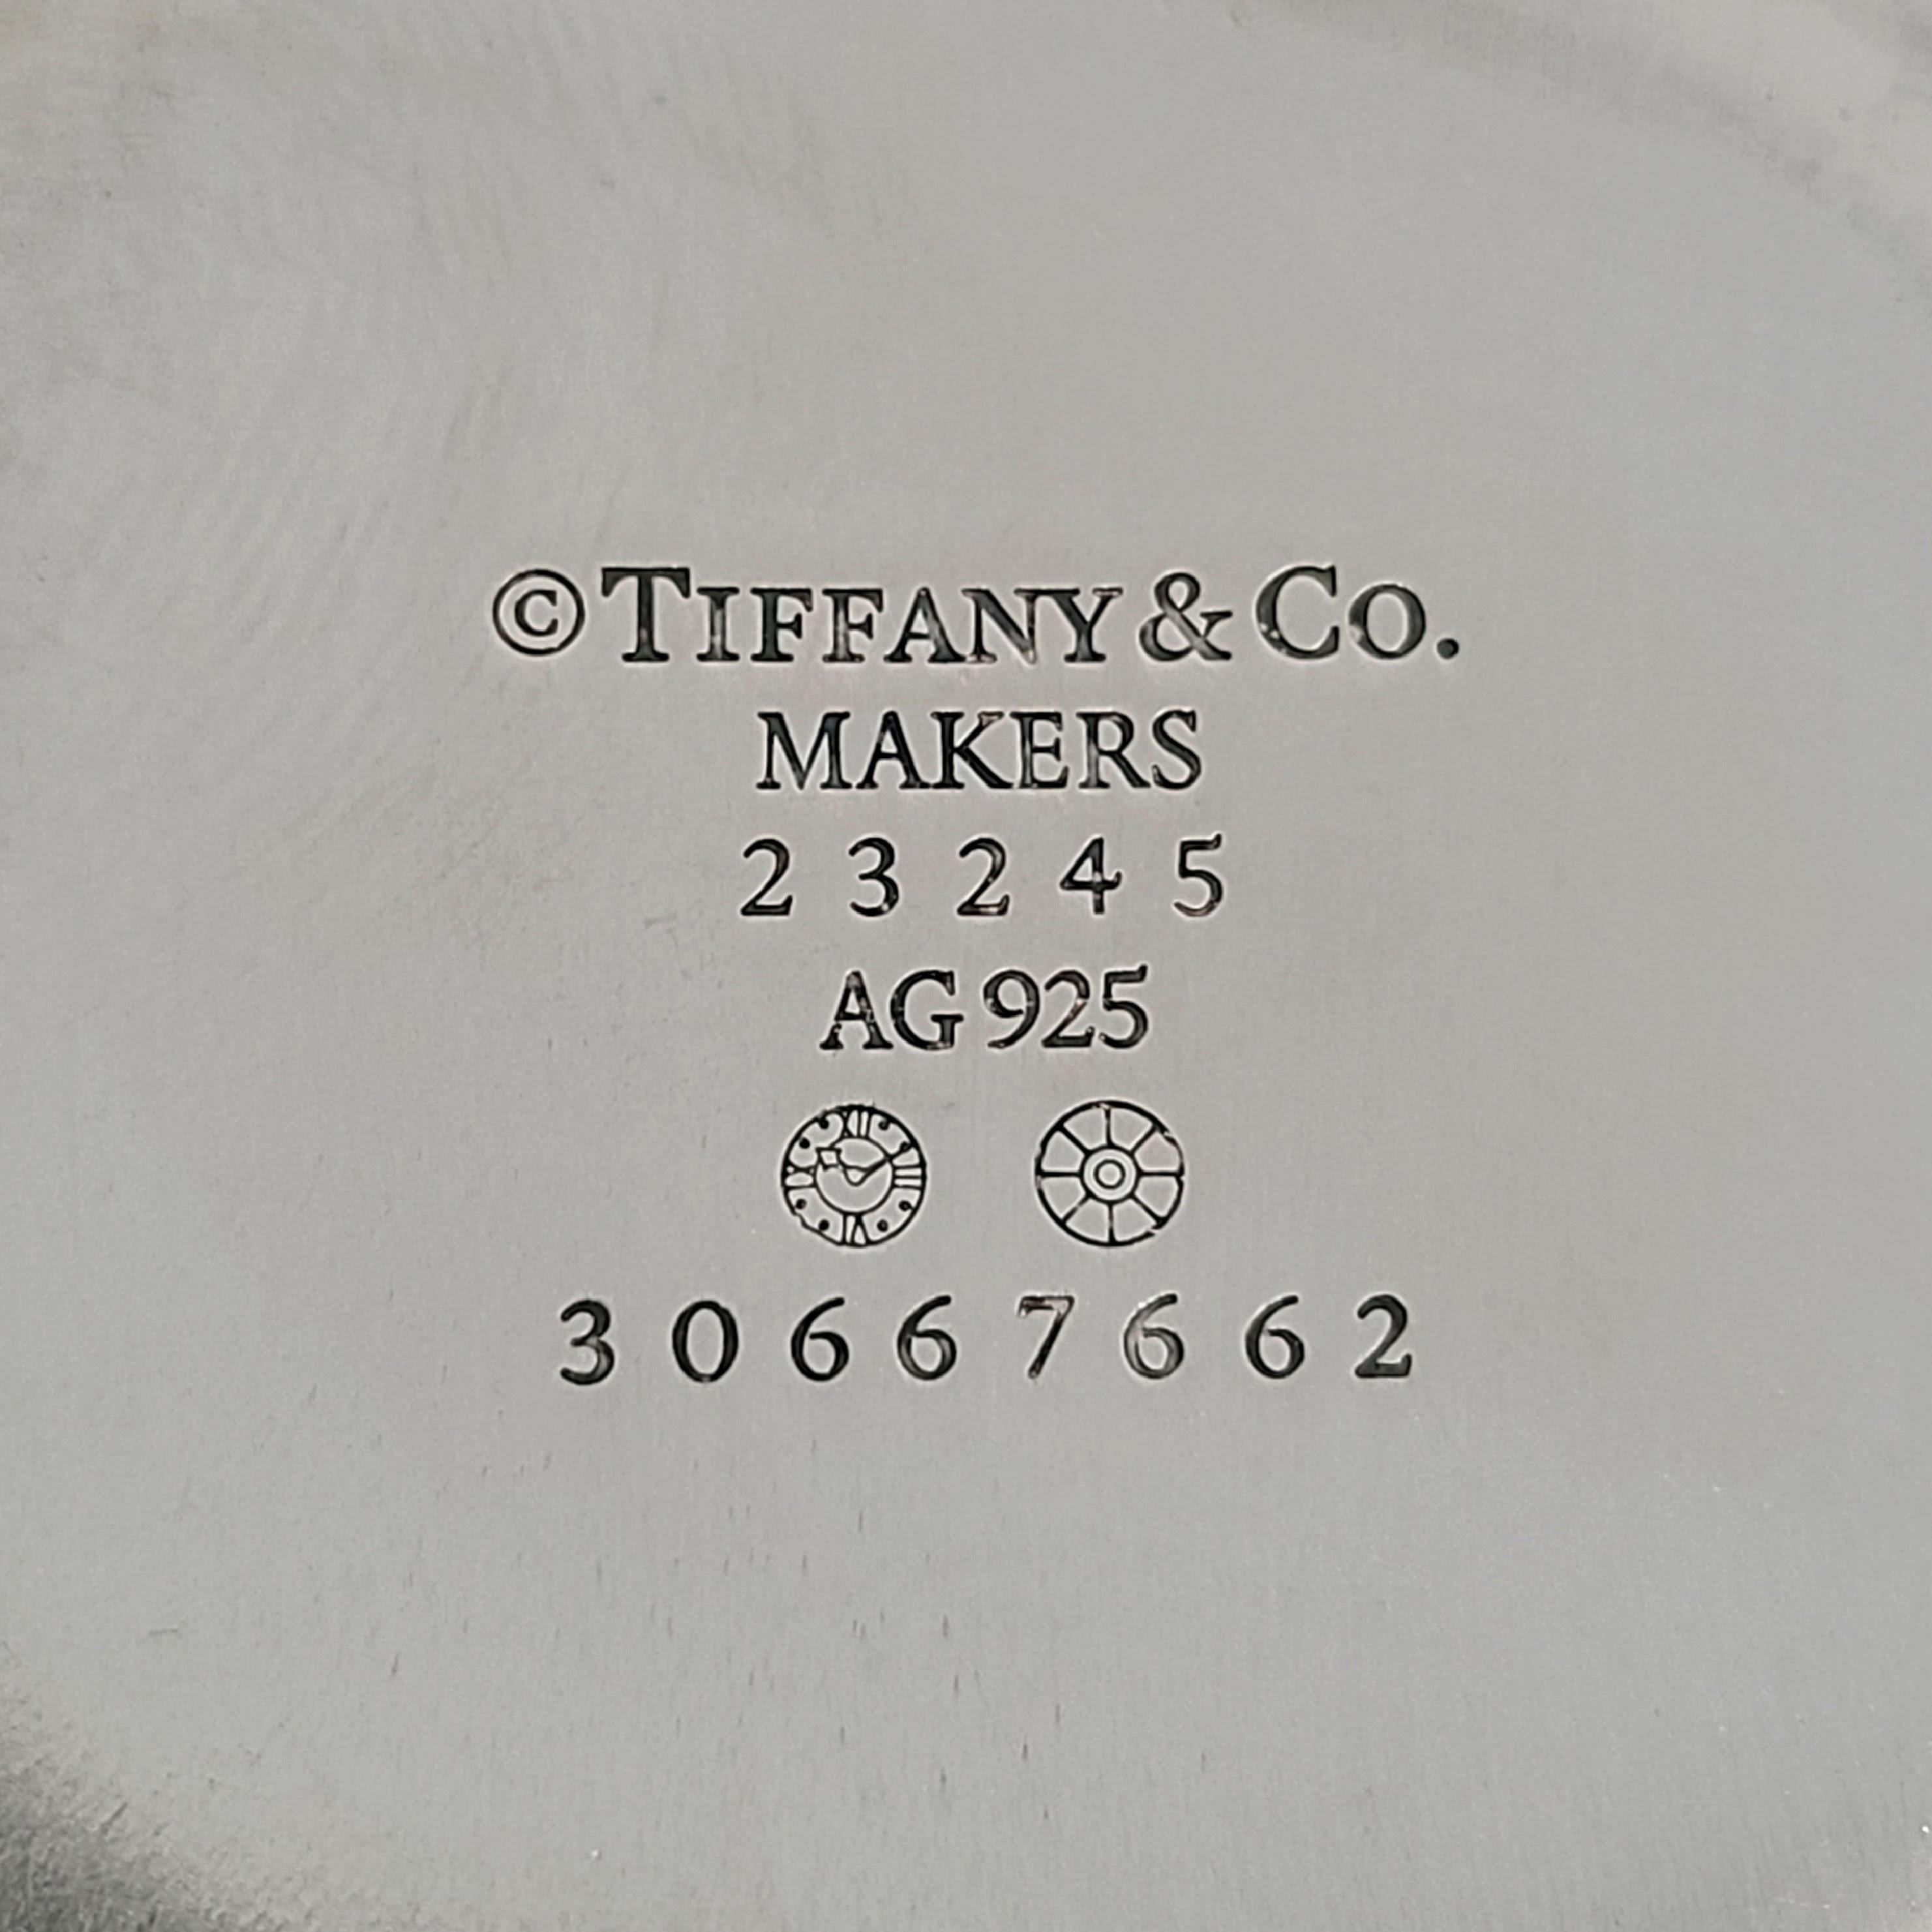 Set of 3 Tiffany & Co. Sterling Silver Baby Cups 23245 2